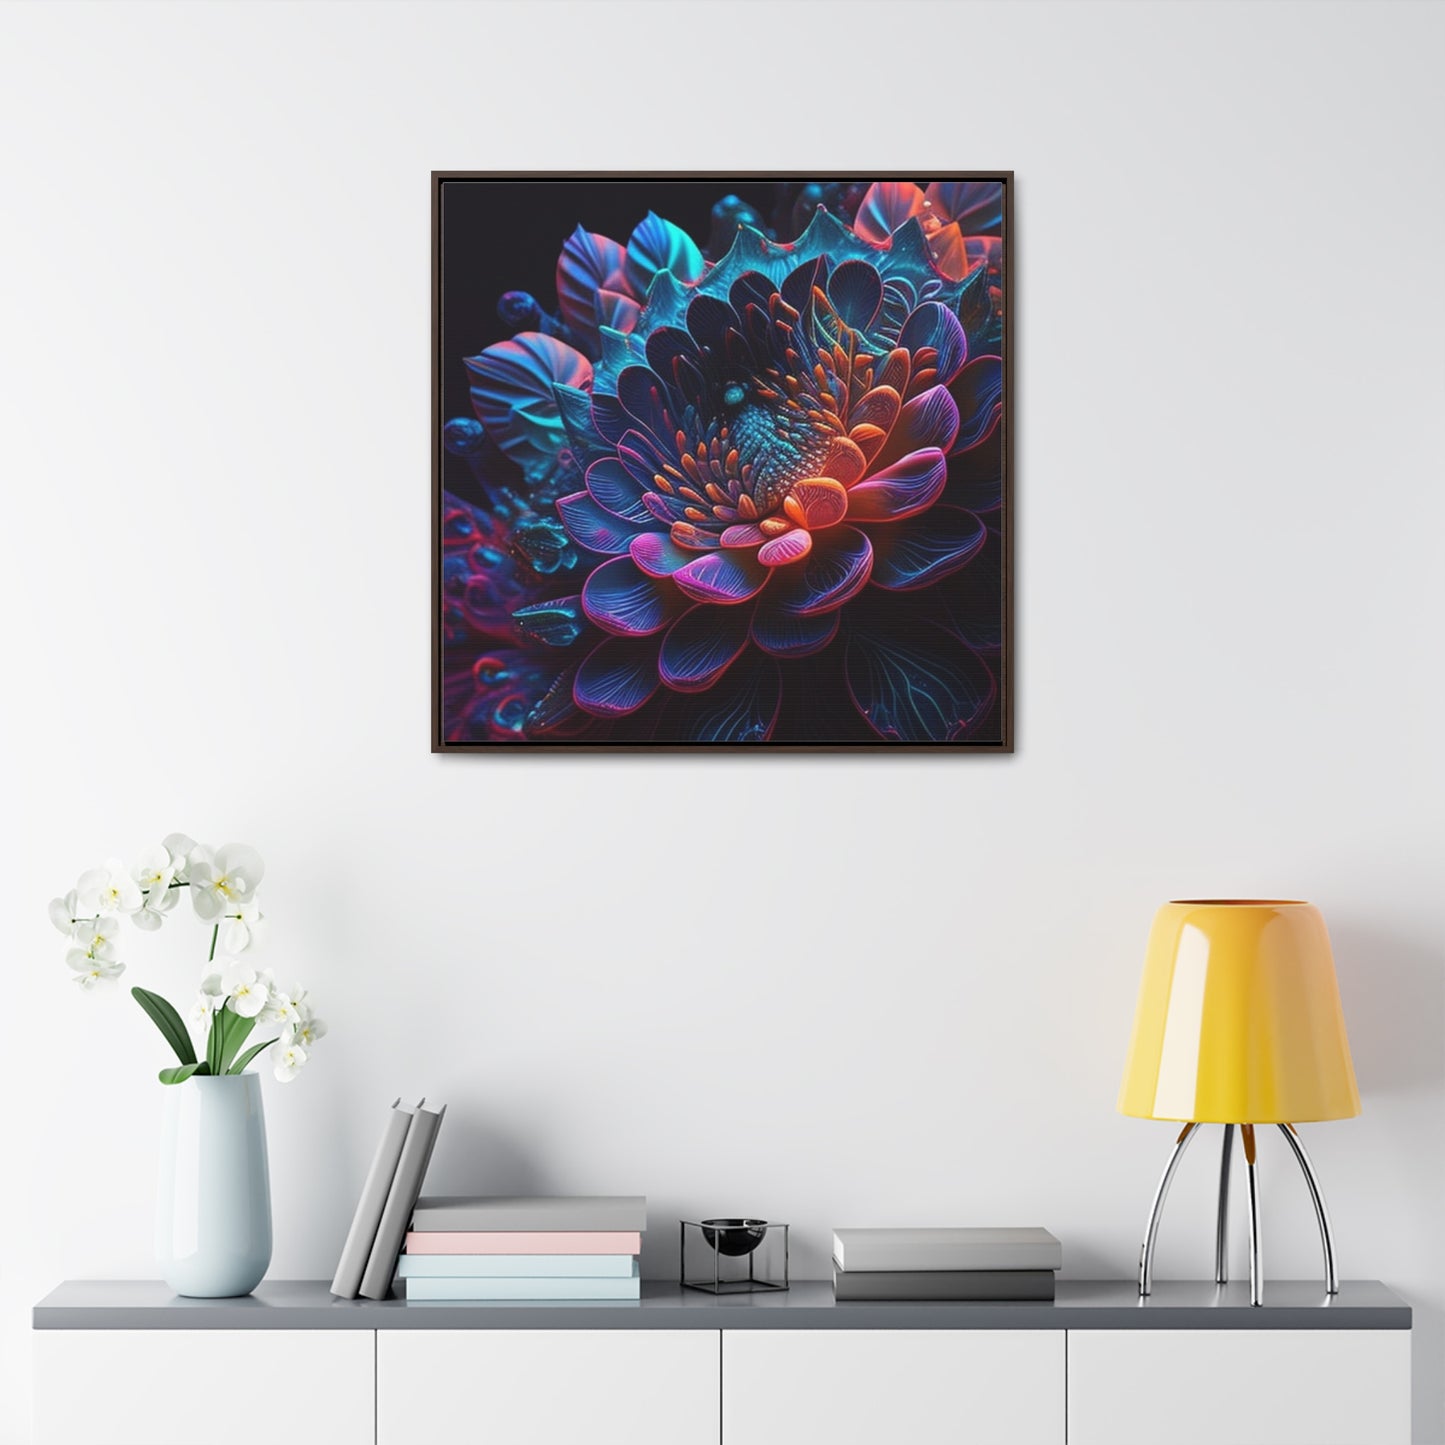 Gallery Canvas Wraps, Square Frame Neon Florescent Glow 4